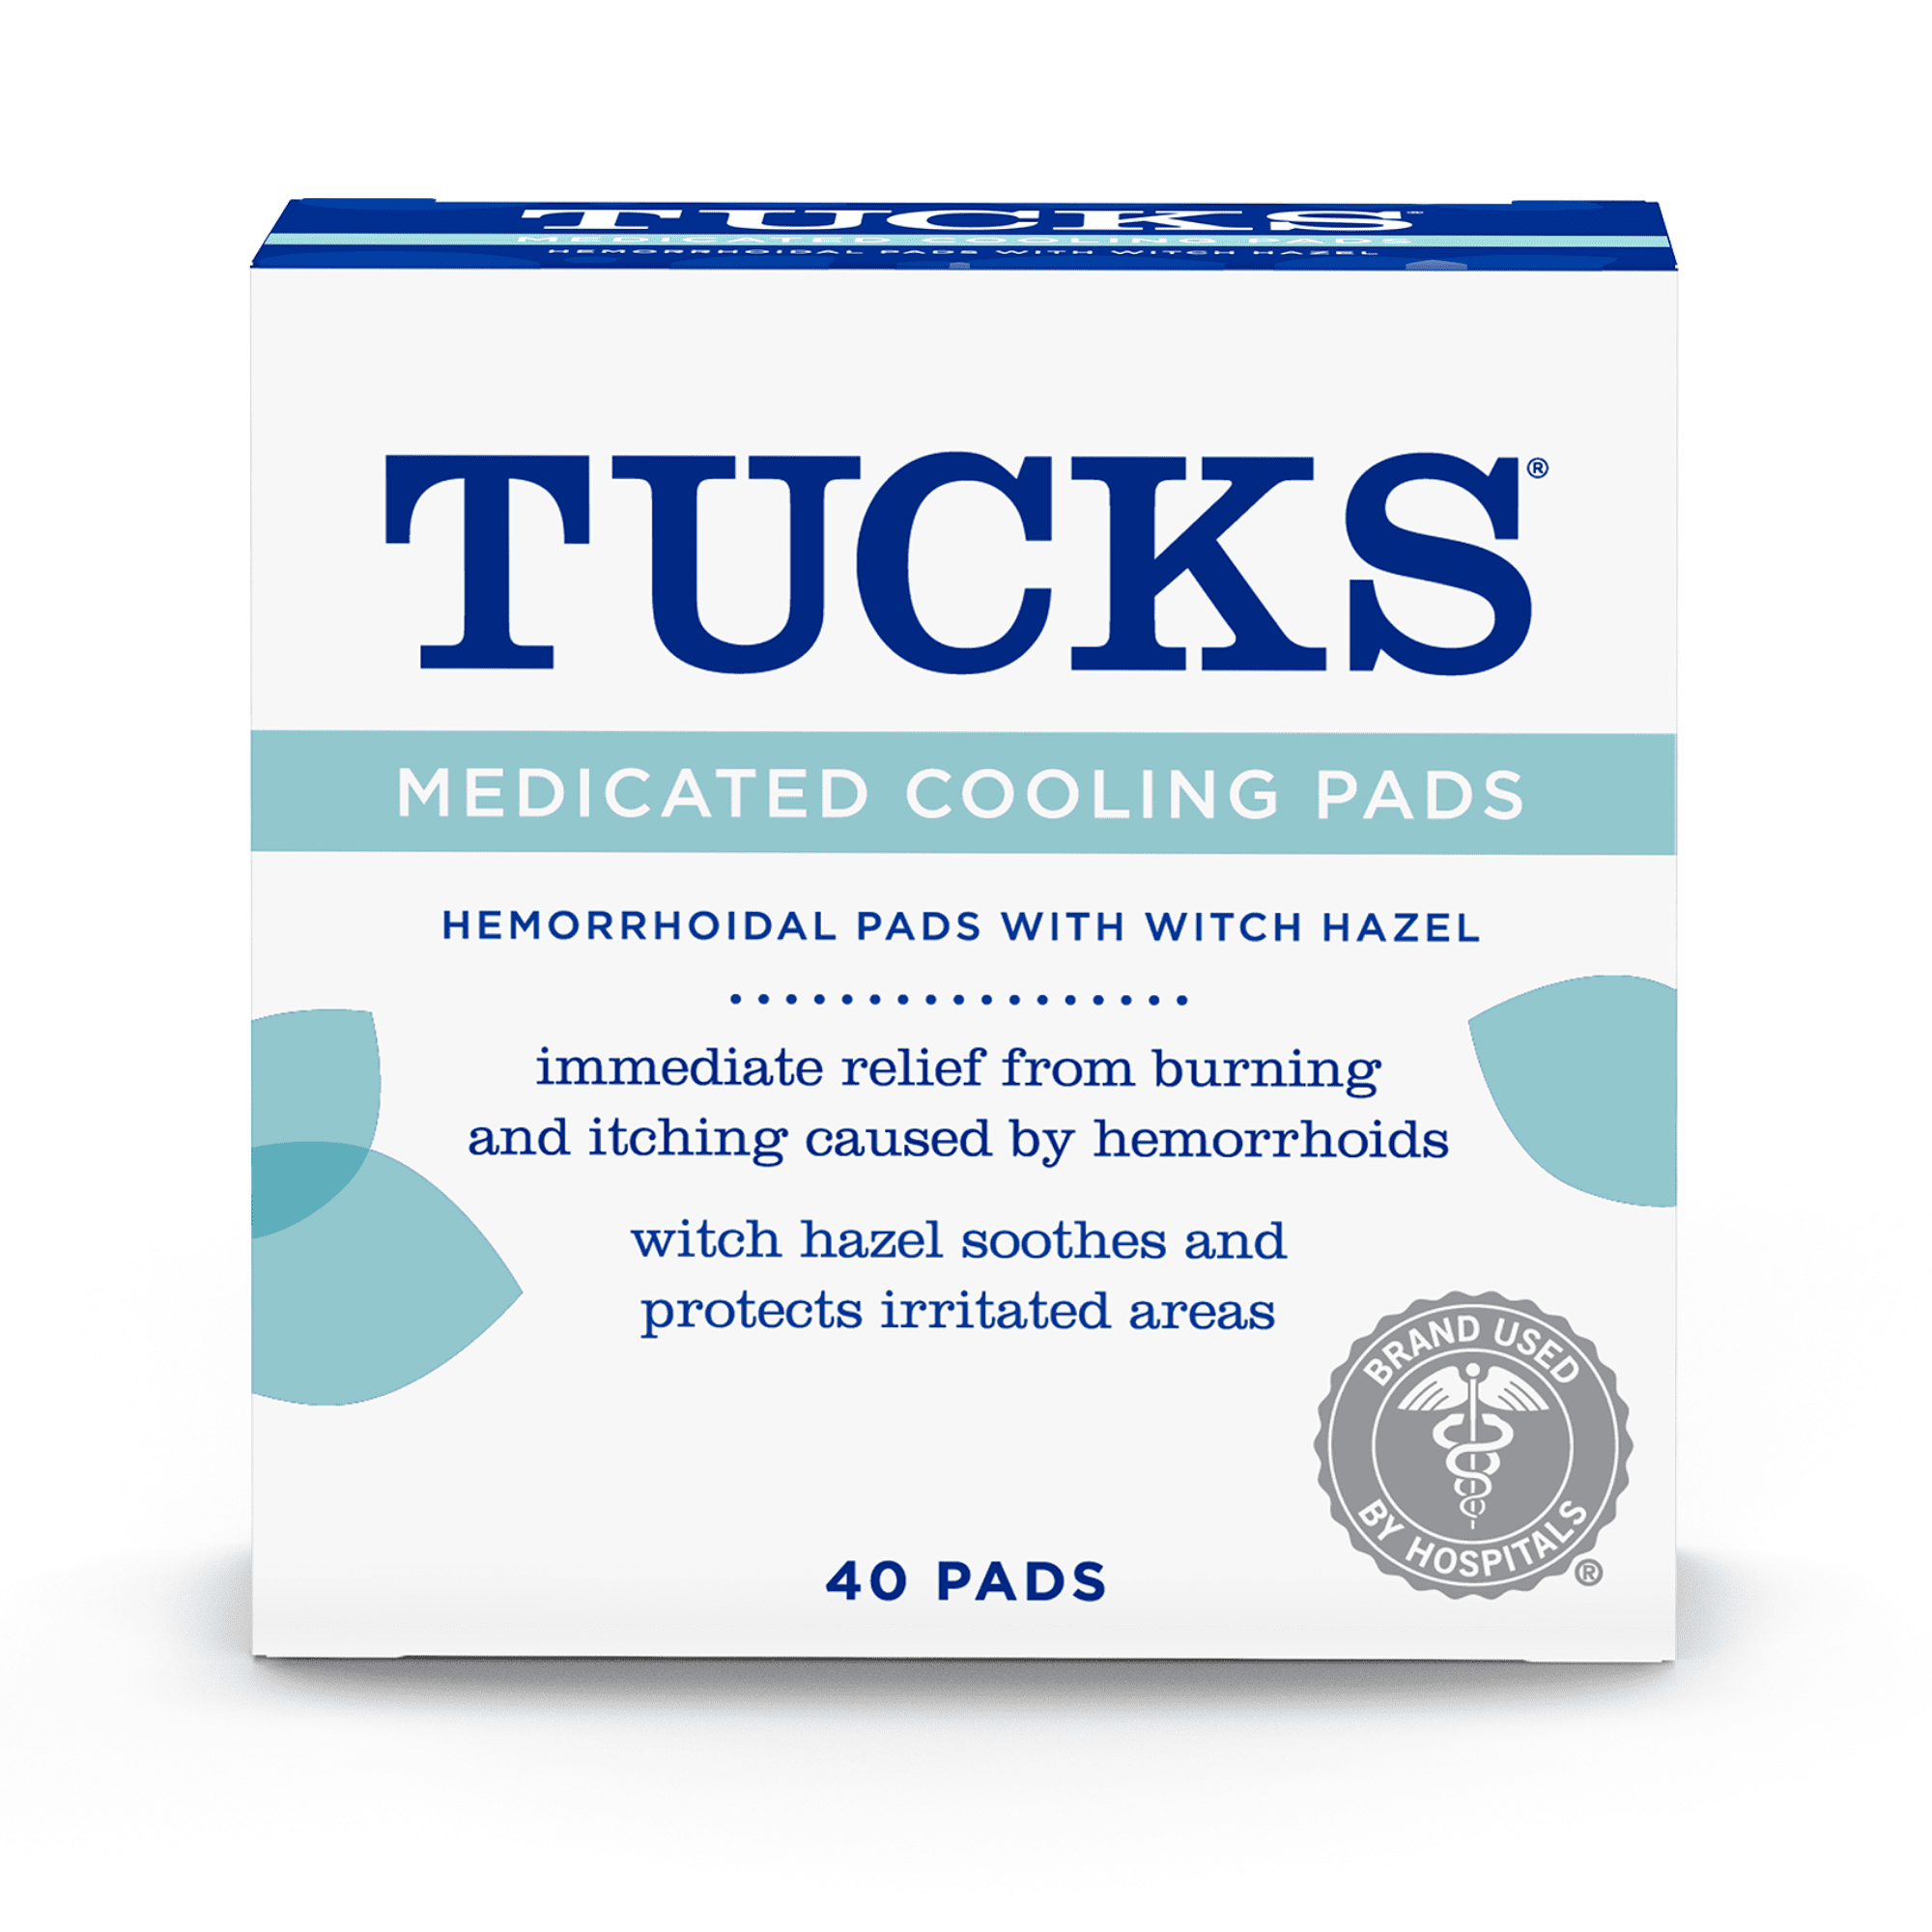 Tucks Medicated Hemorrhoidal Pads, Witch Hazel, Health & Personal Care